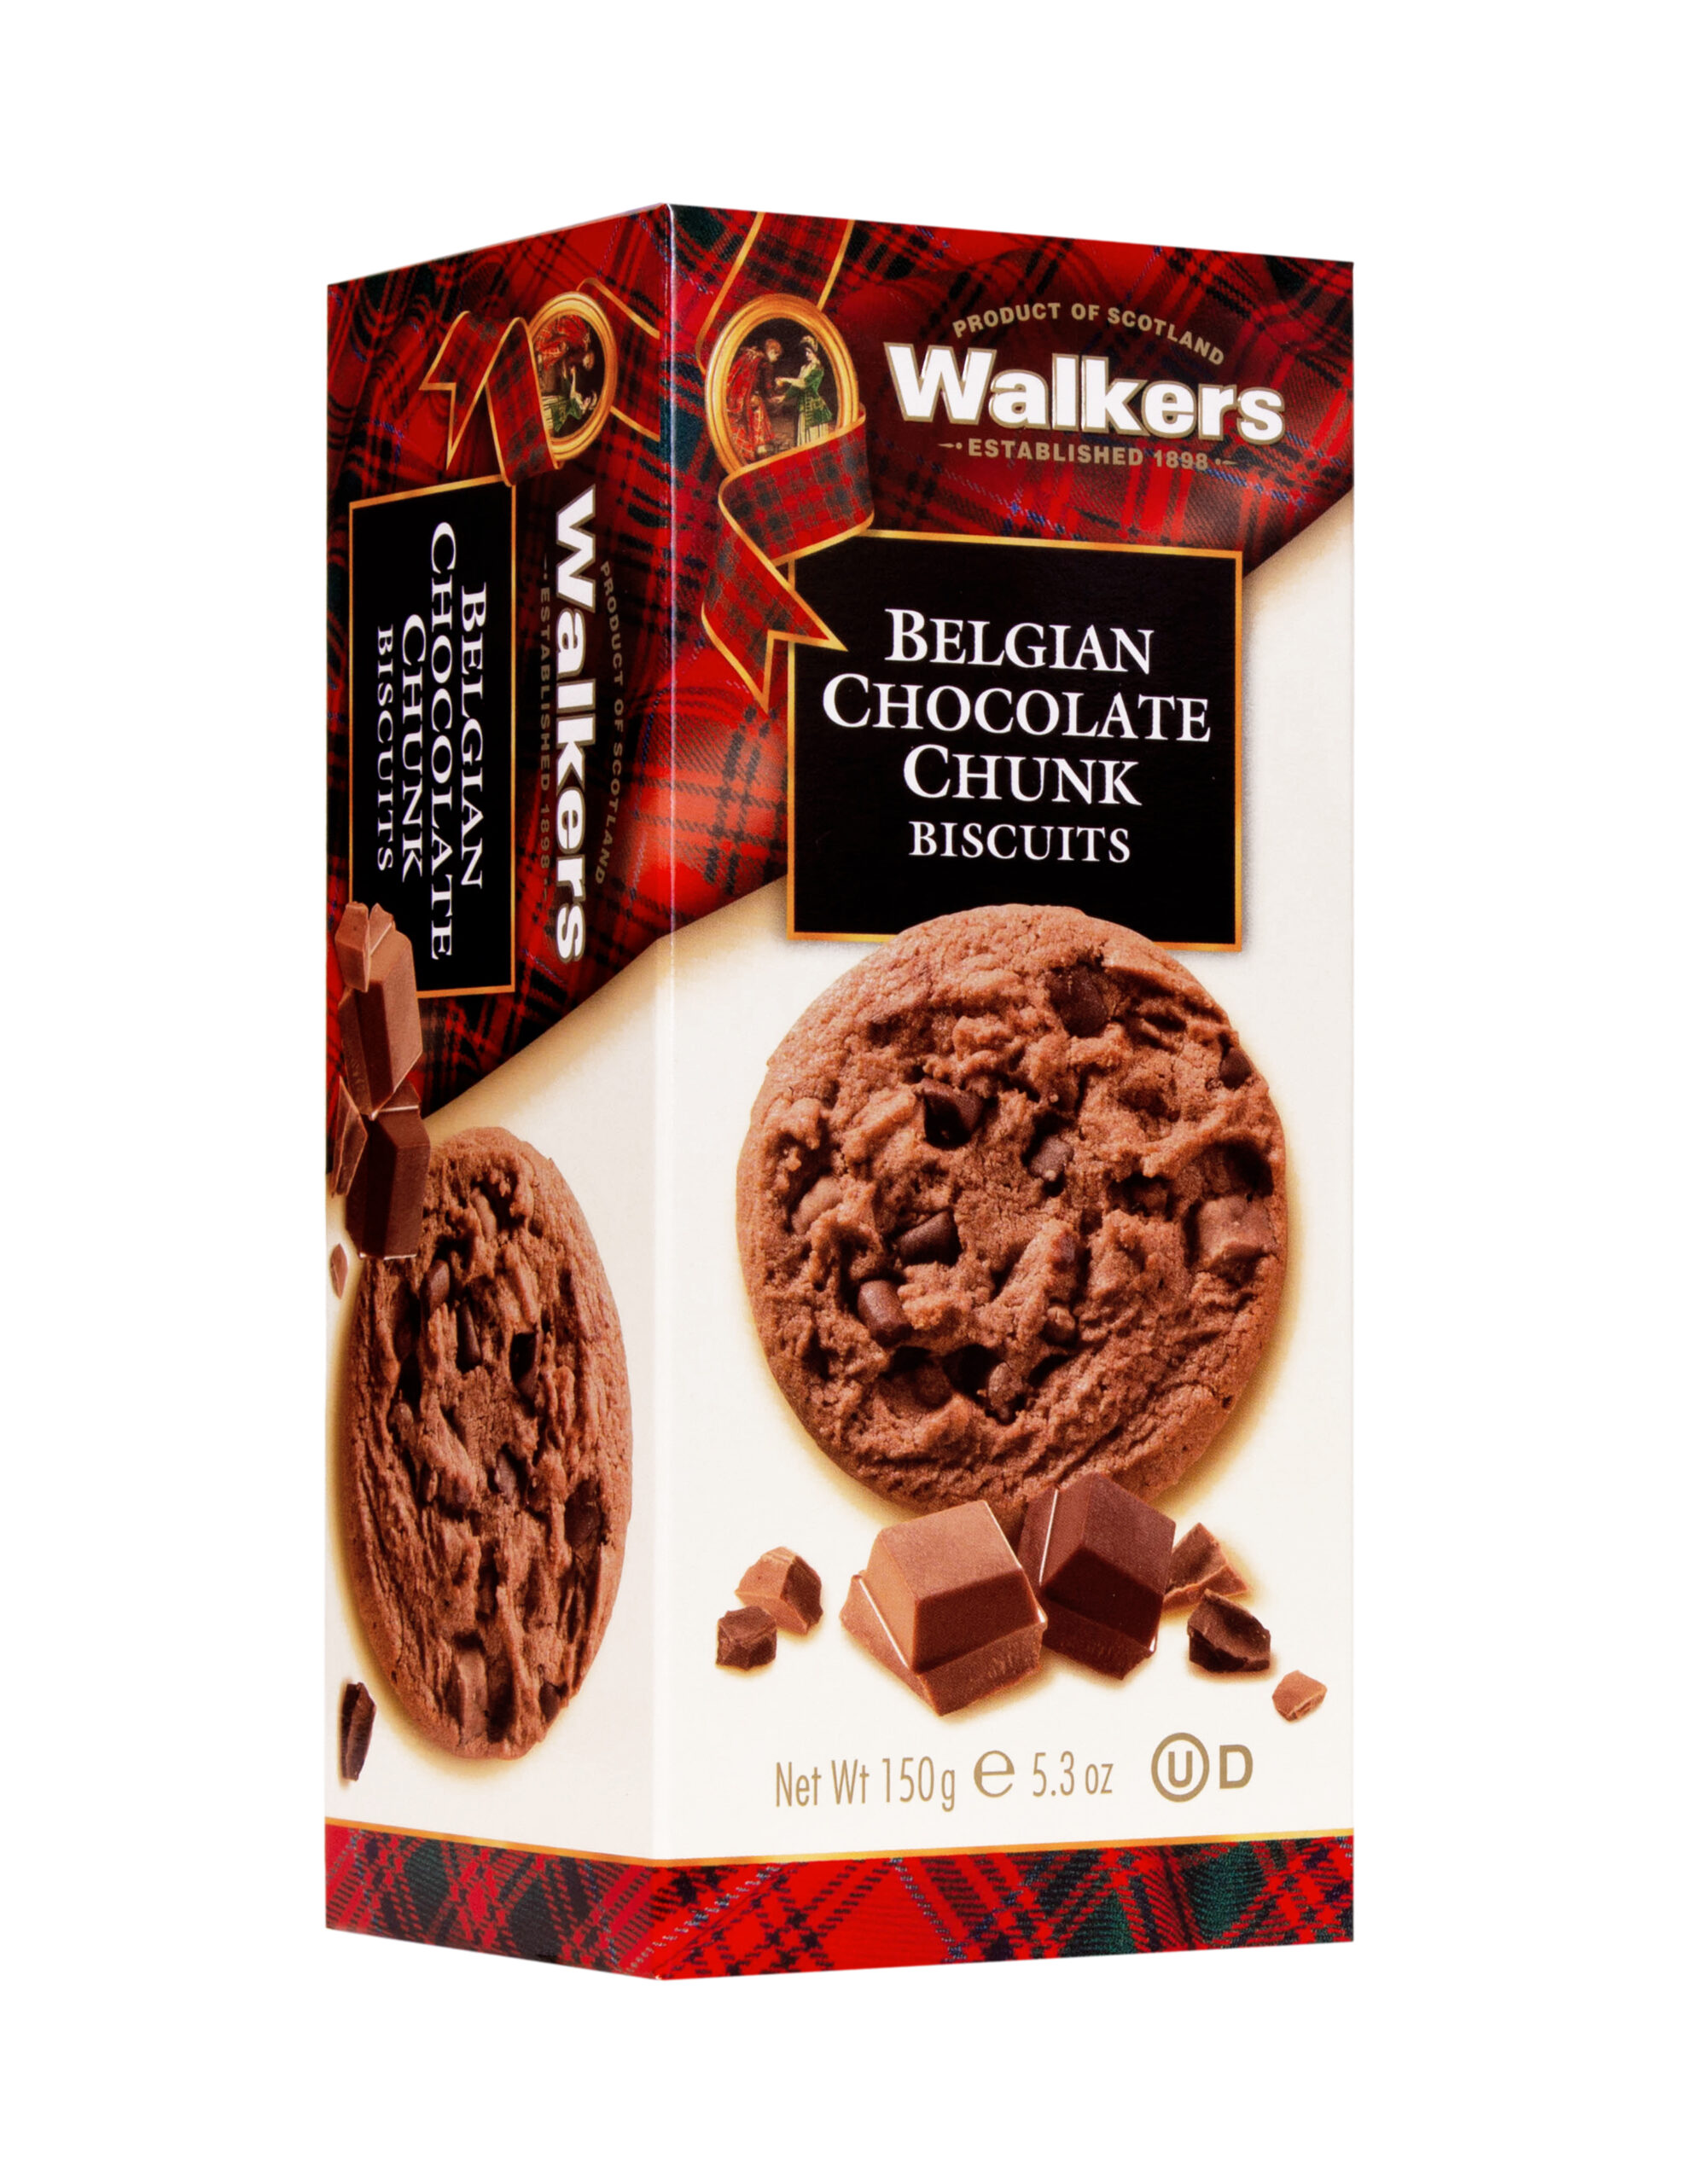 Carton Double Choc Chunk Biscuits.